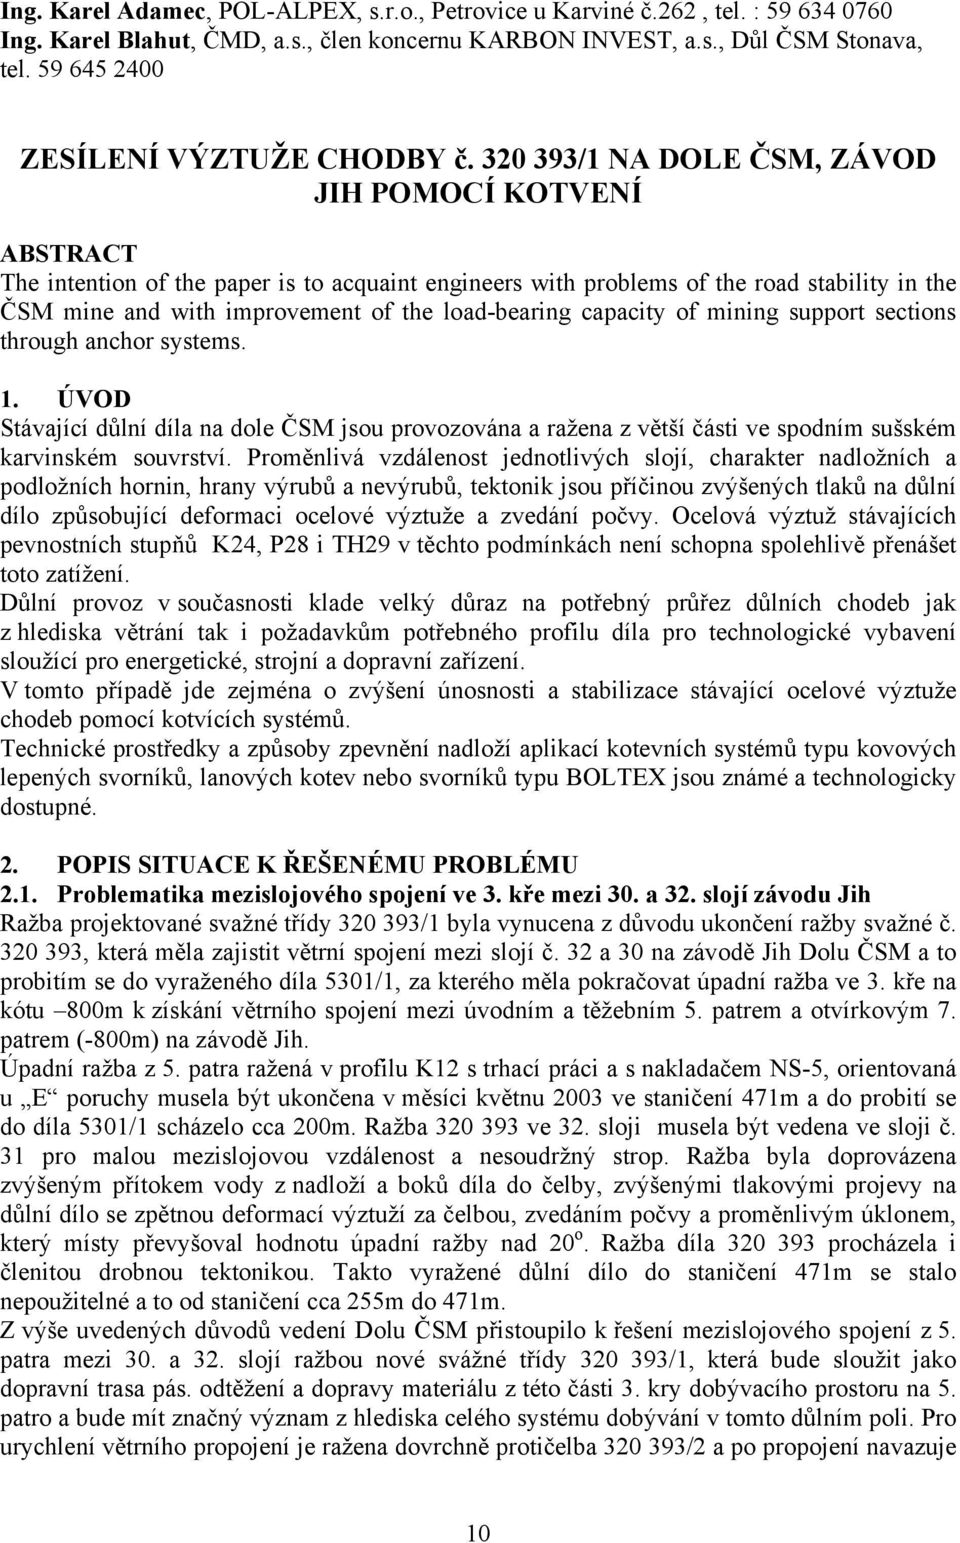 320 393/1 NA DOLE ČSM, ZÁVOD JIH POMOCÍ KOTVENÍ ABSTRACT The intention of the paper is to acquaint engineers with problems of the road stability in the ČSM mine and with improvement of the